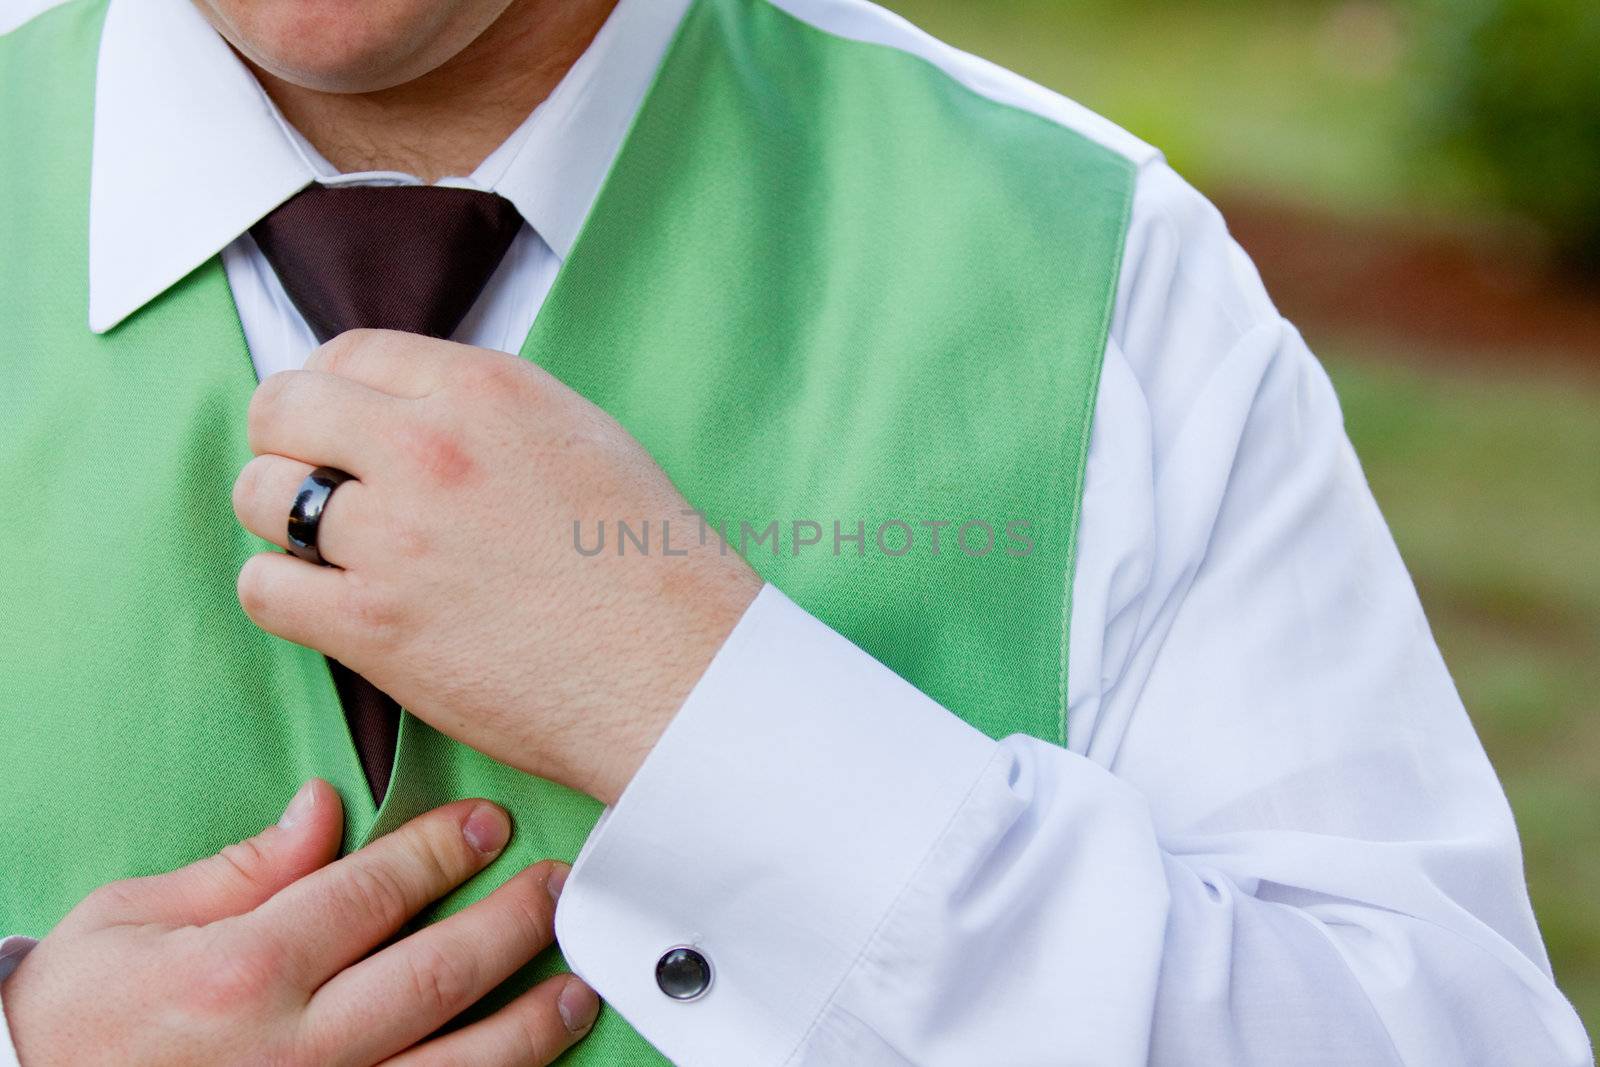 A groom is messing with his tie and vest at a wedding reception.